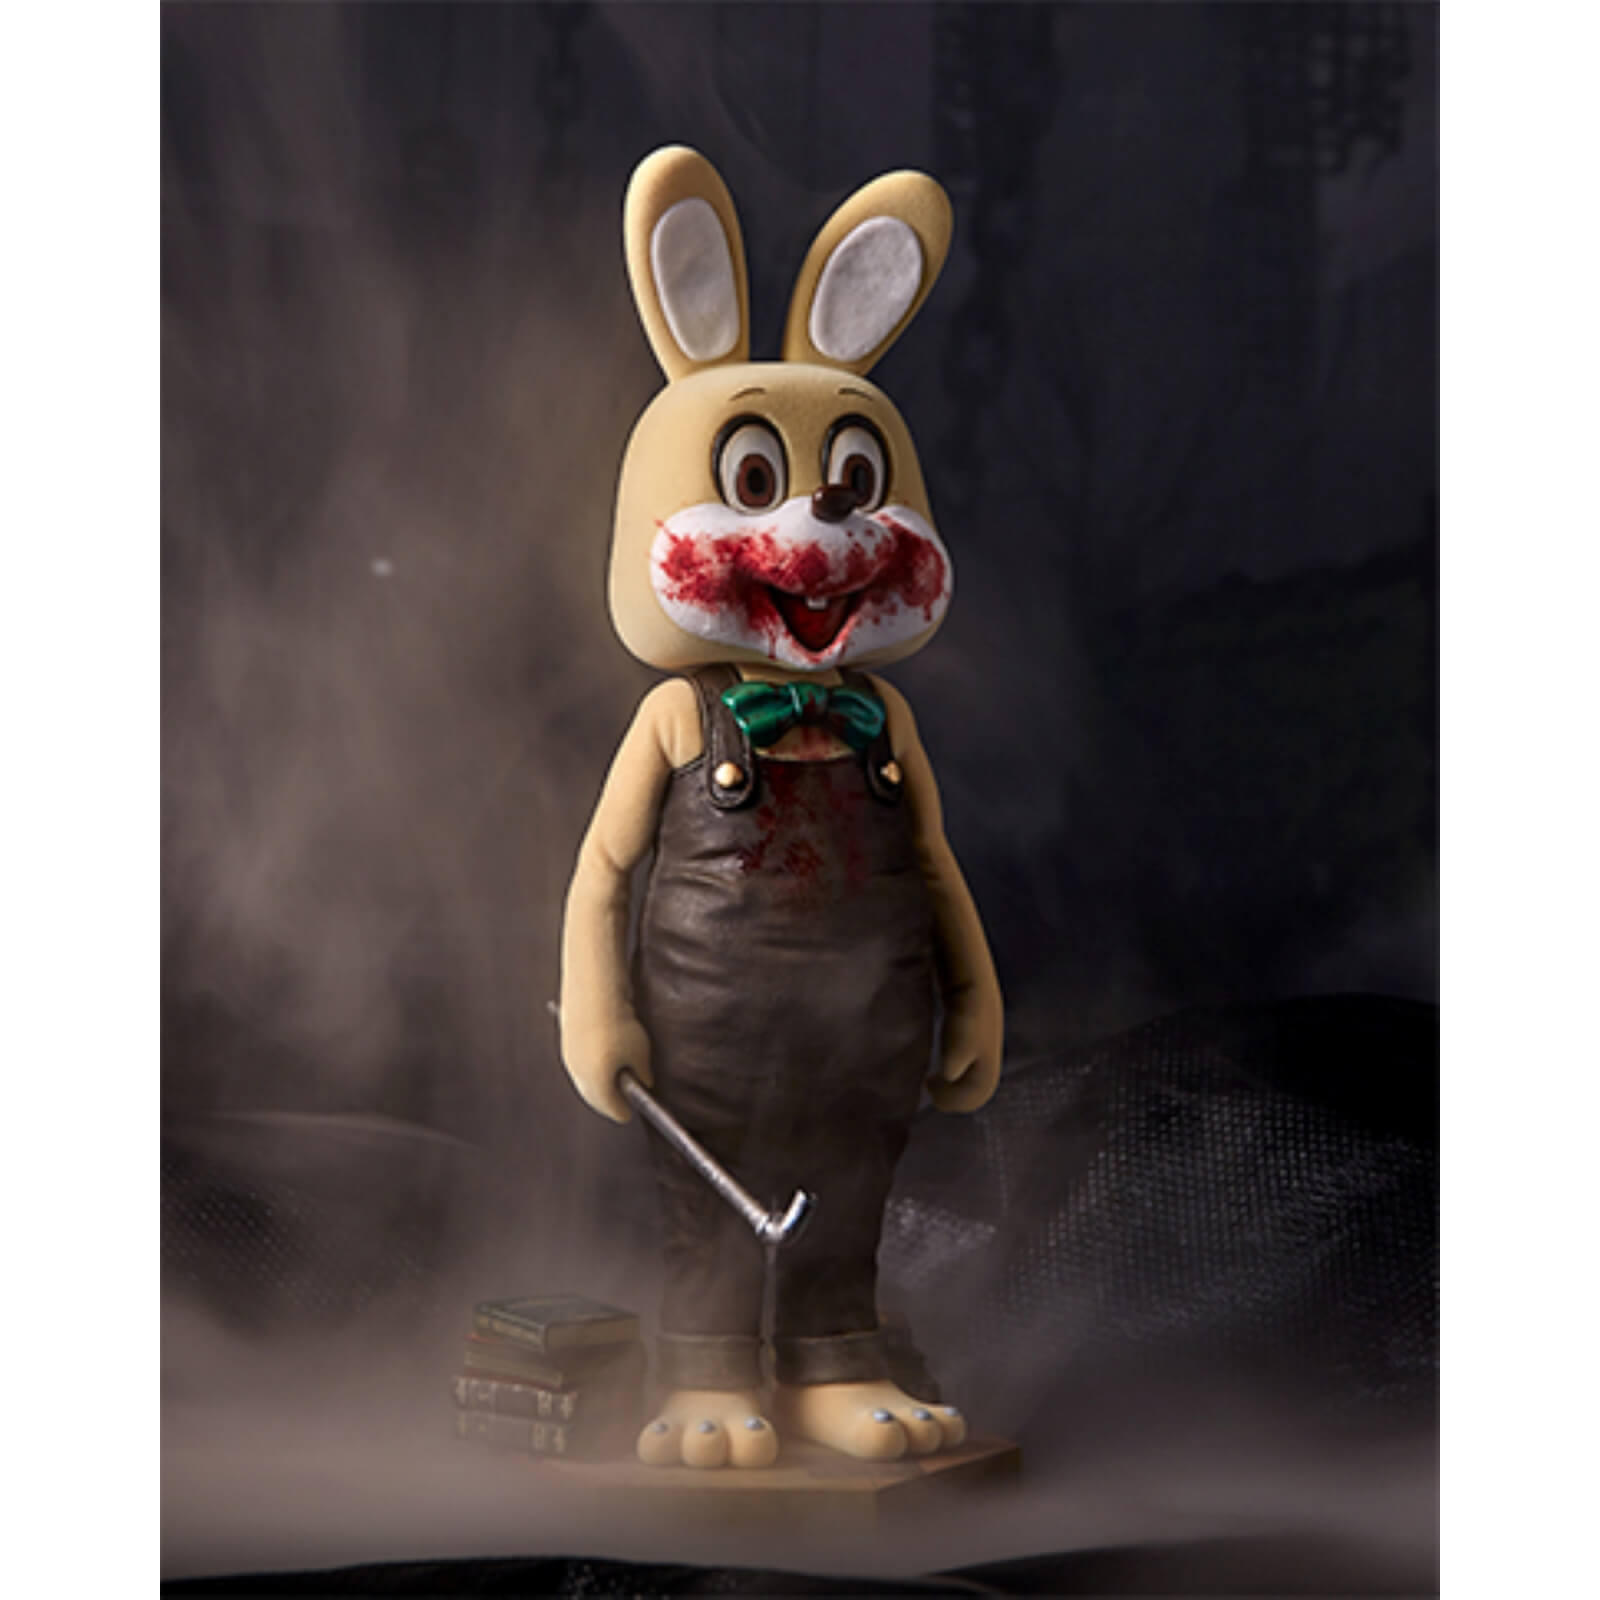 Silent Hill x Dead by Daylight 1/6 Scale Premium Statue - Robbie The Rabbit (Yellow Version)